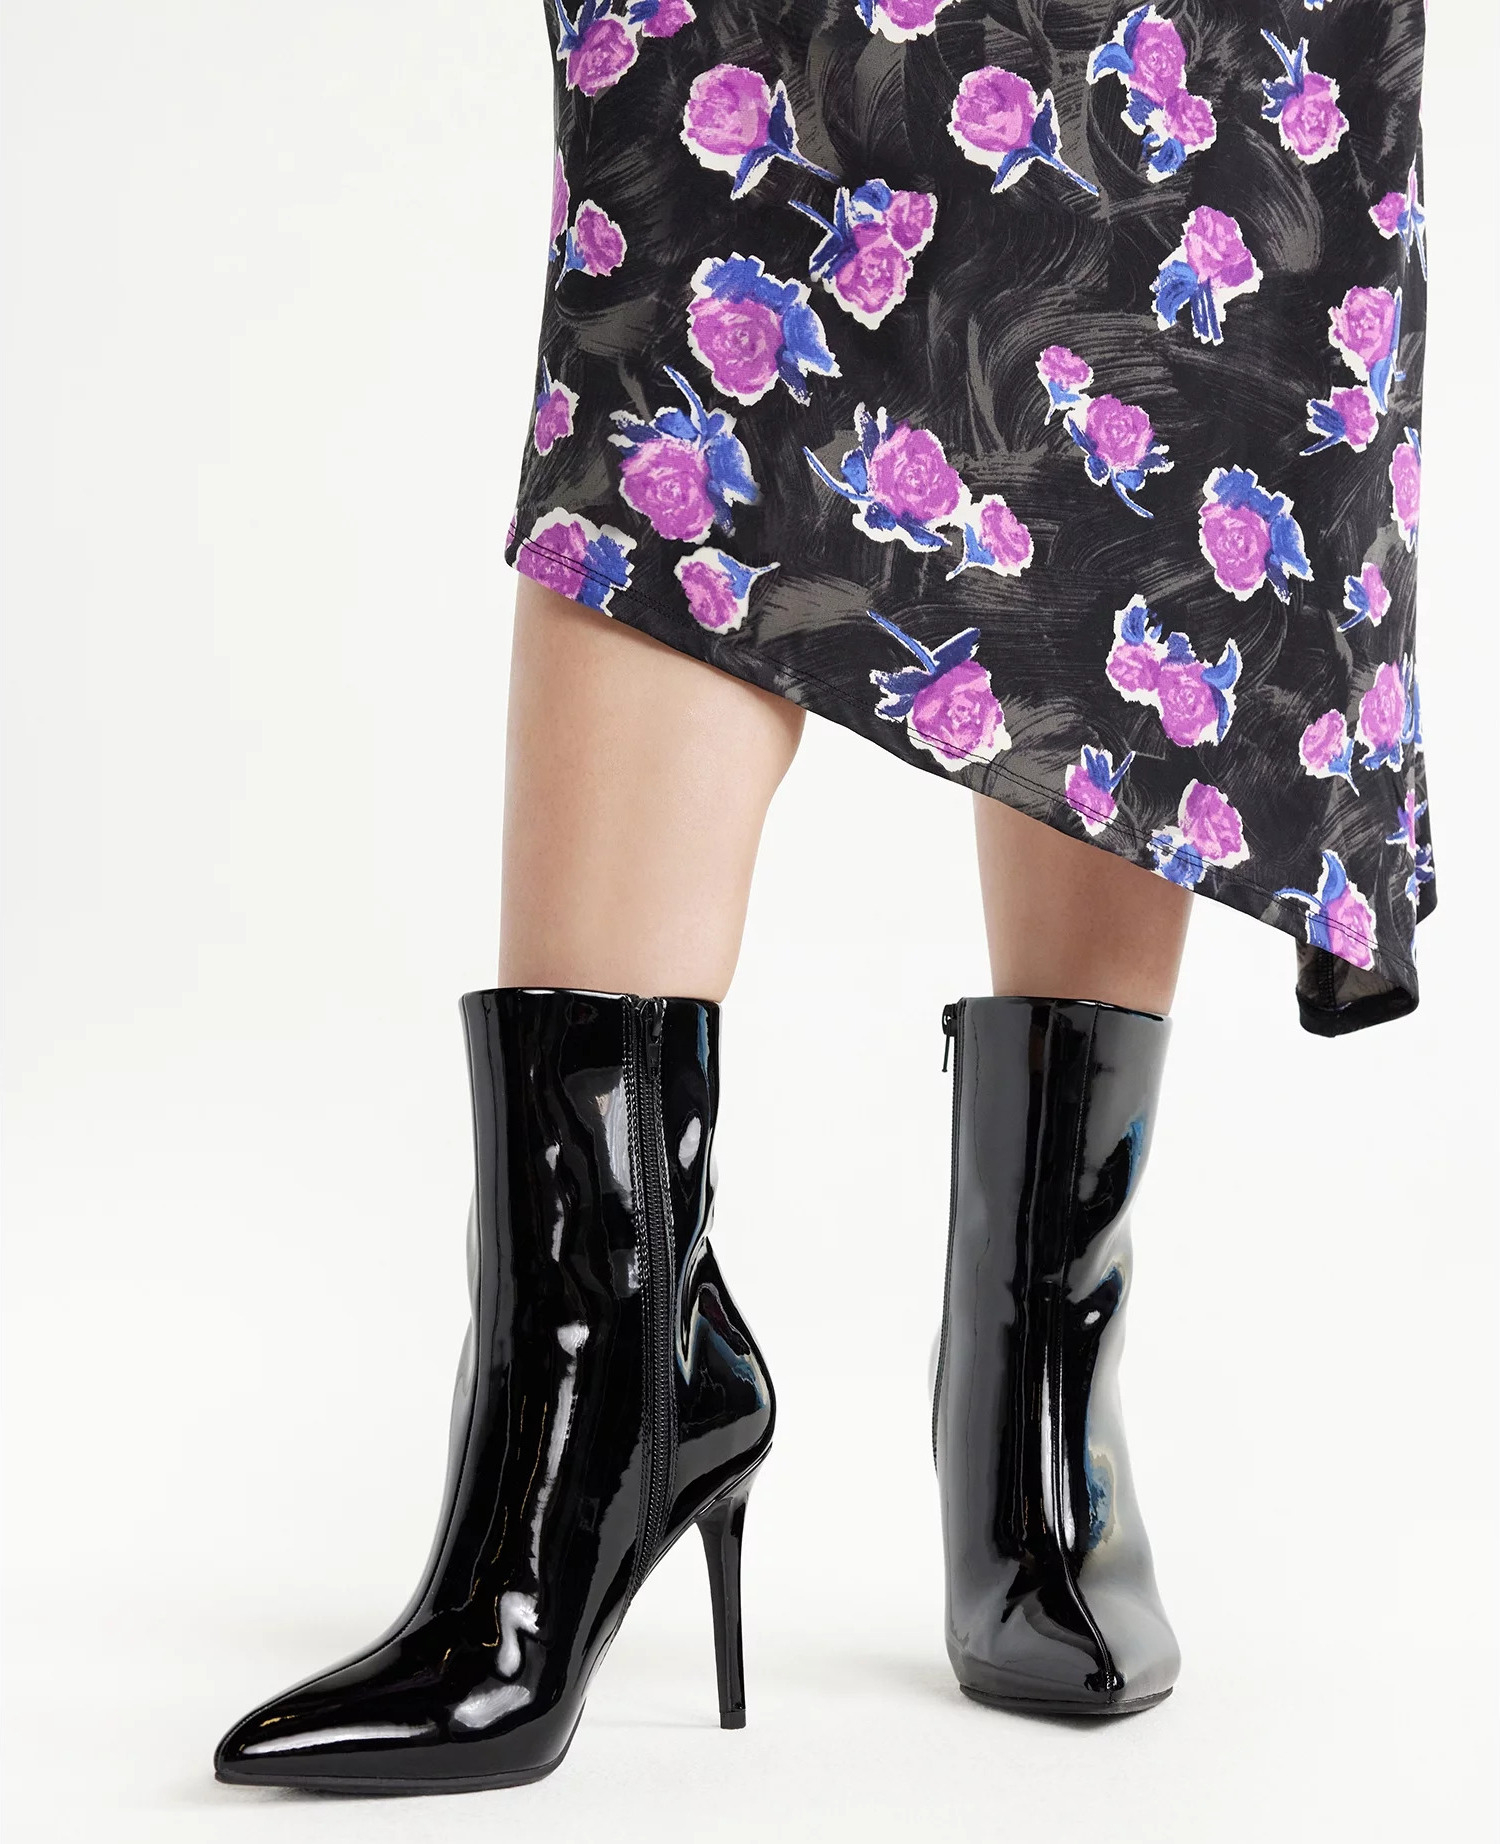 A model wearing the midcalf boots in black patent